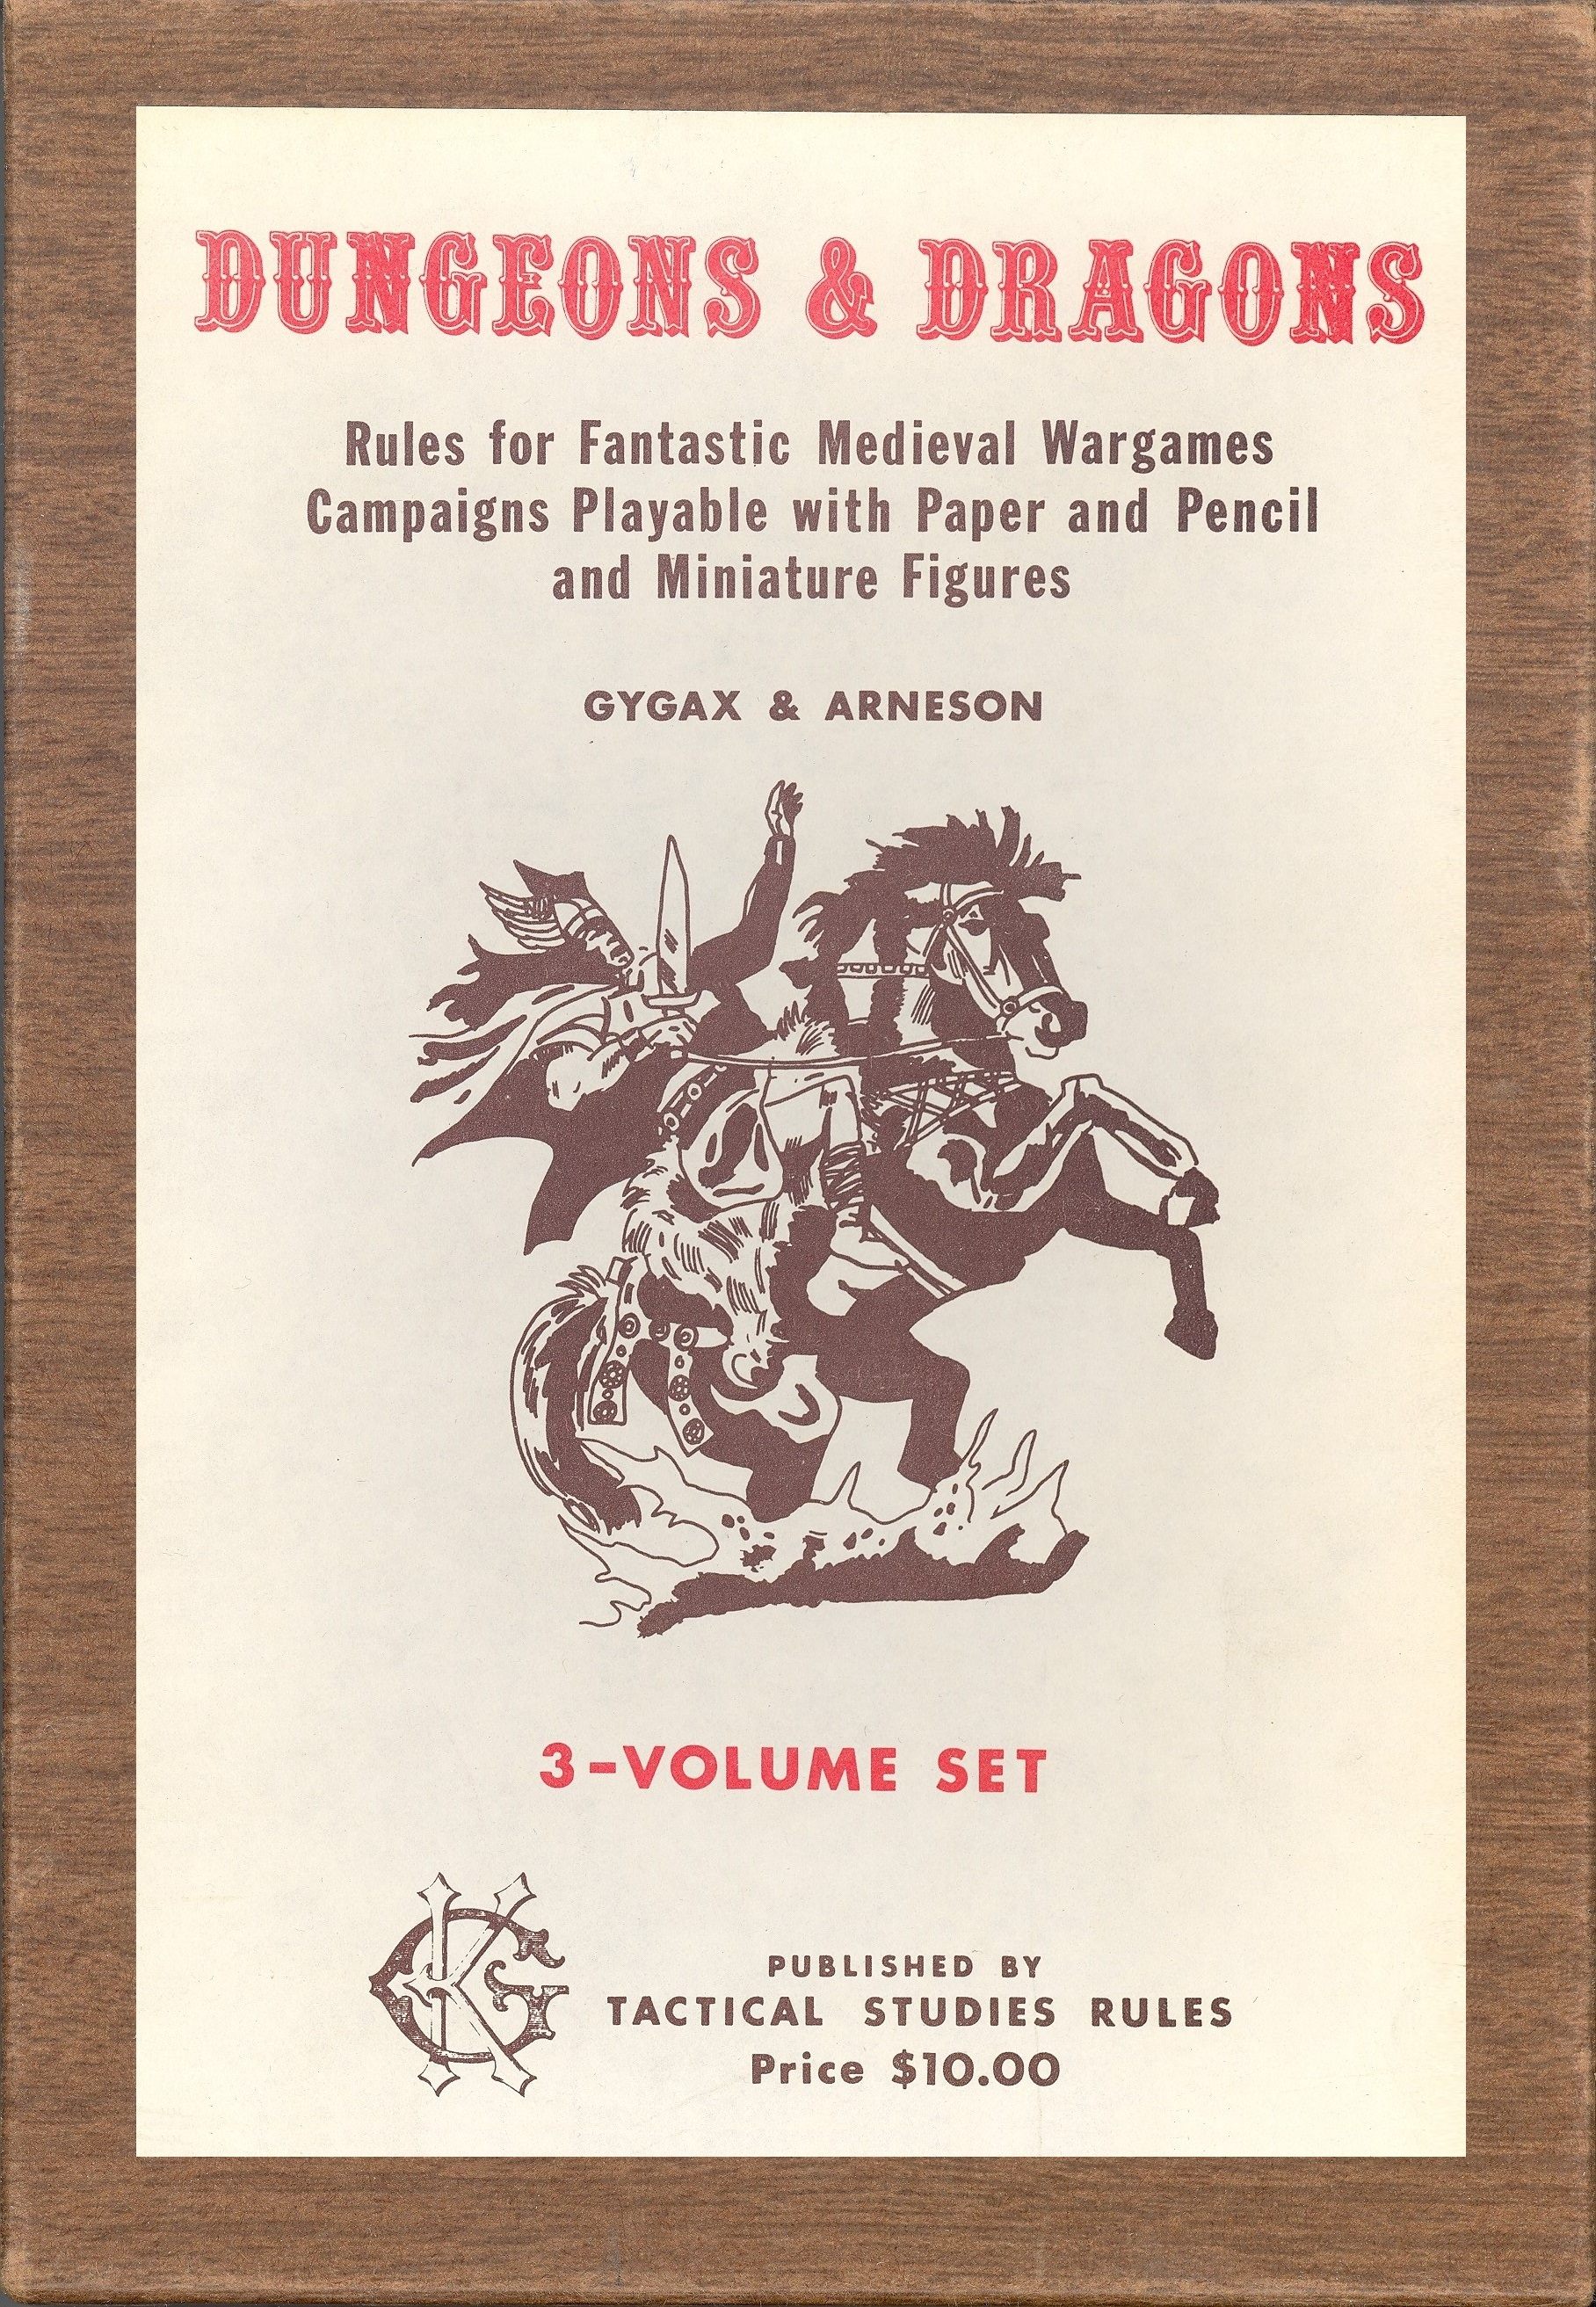 Gary Gygax reportedly assembled the first editions of Dungeons & Dragons by hand in his kitchen. The game's box (shown here) showed a knight rearing up on a horse. 